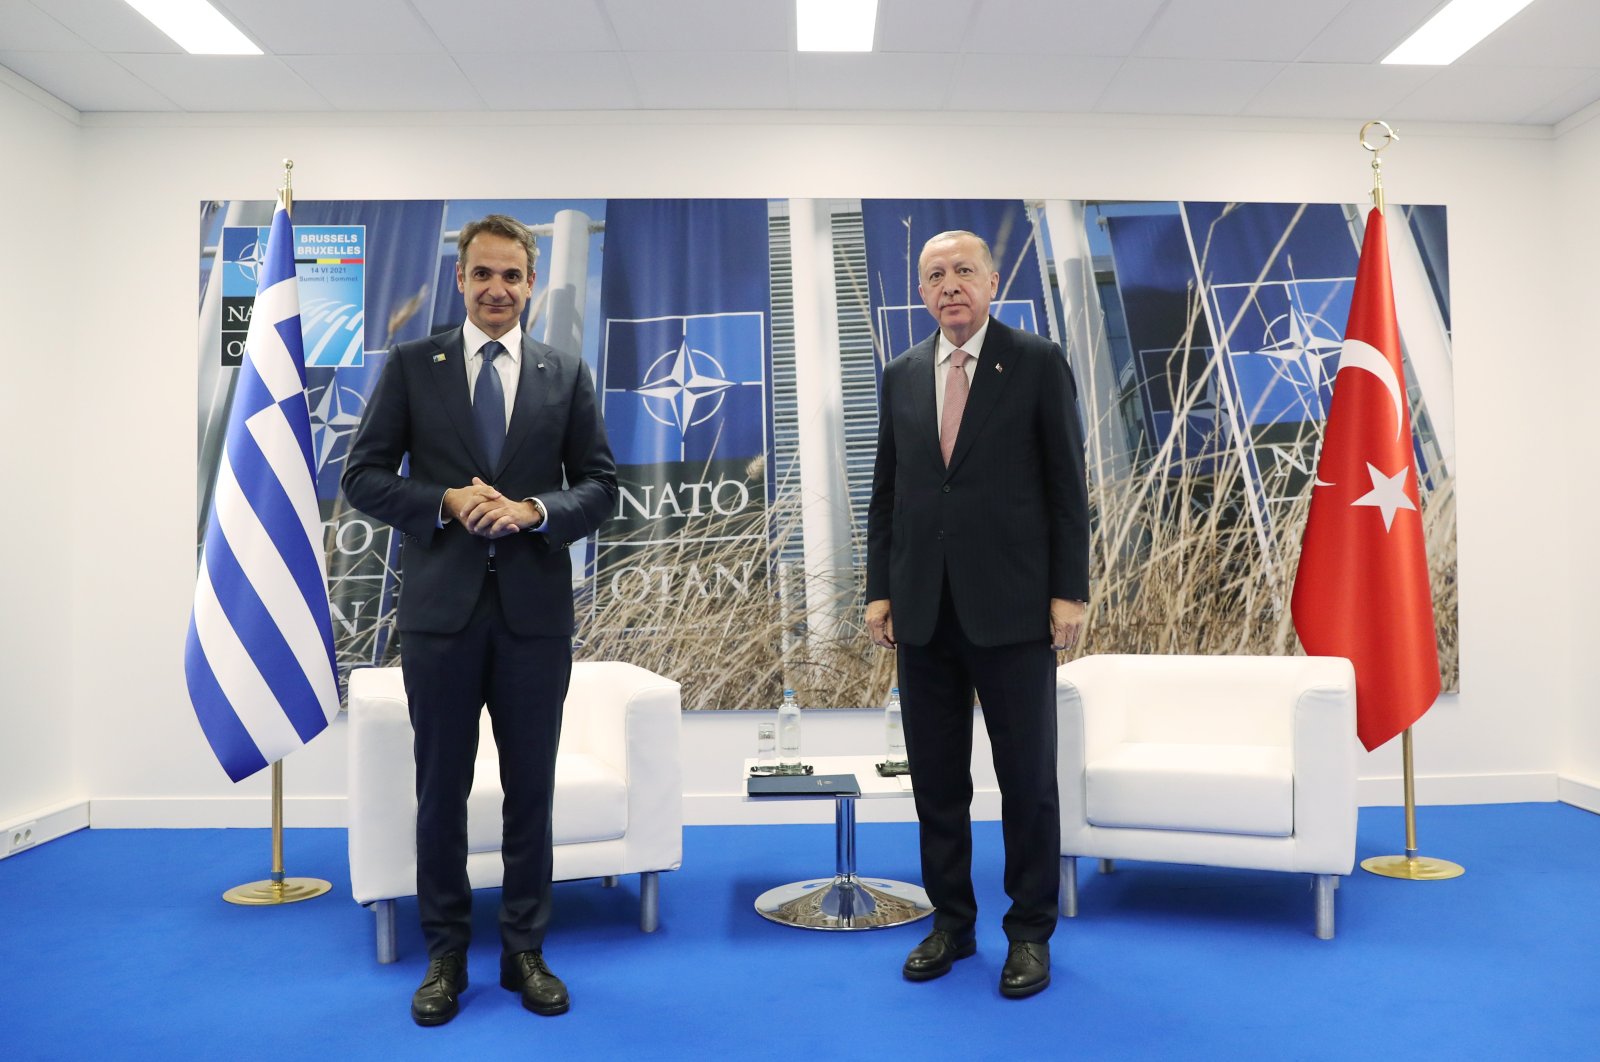 President Recep Tayyip Erdoğan (R) and Greek Prime Minister Kyriakos Mitsotakis pose for photos before their meeting on the sidelines of the NATO Leaders’ Summit in Brussels, Belgium, June 14, 2021. (AA Photo)